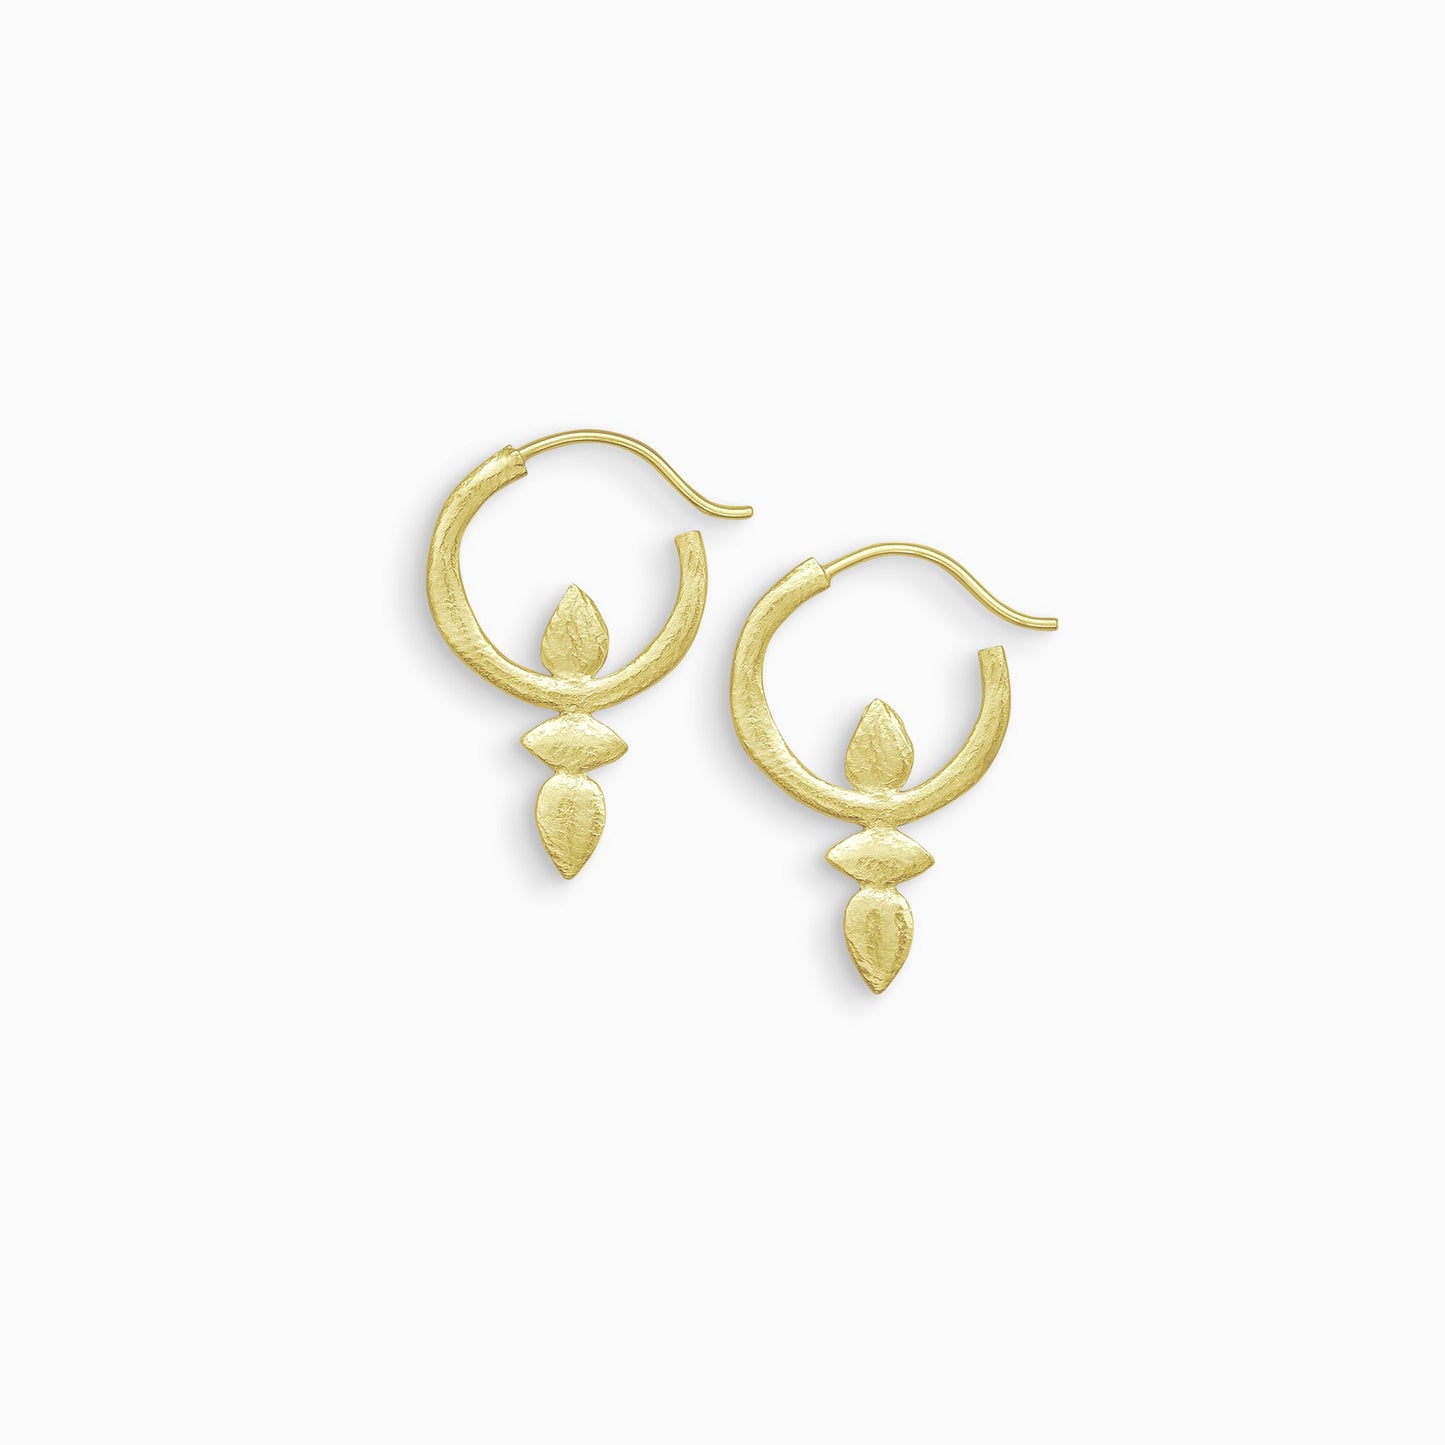 A pair 18ct Fairtrade yellow gold hoop earrings with a stud fastening. Small organic lozenge and teardrop shaped forms are attached below and inside the hoop. 18mm x 30mm